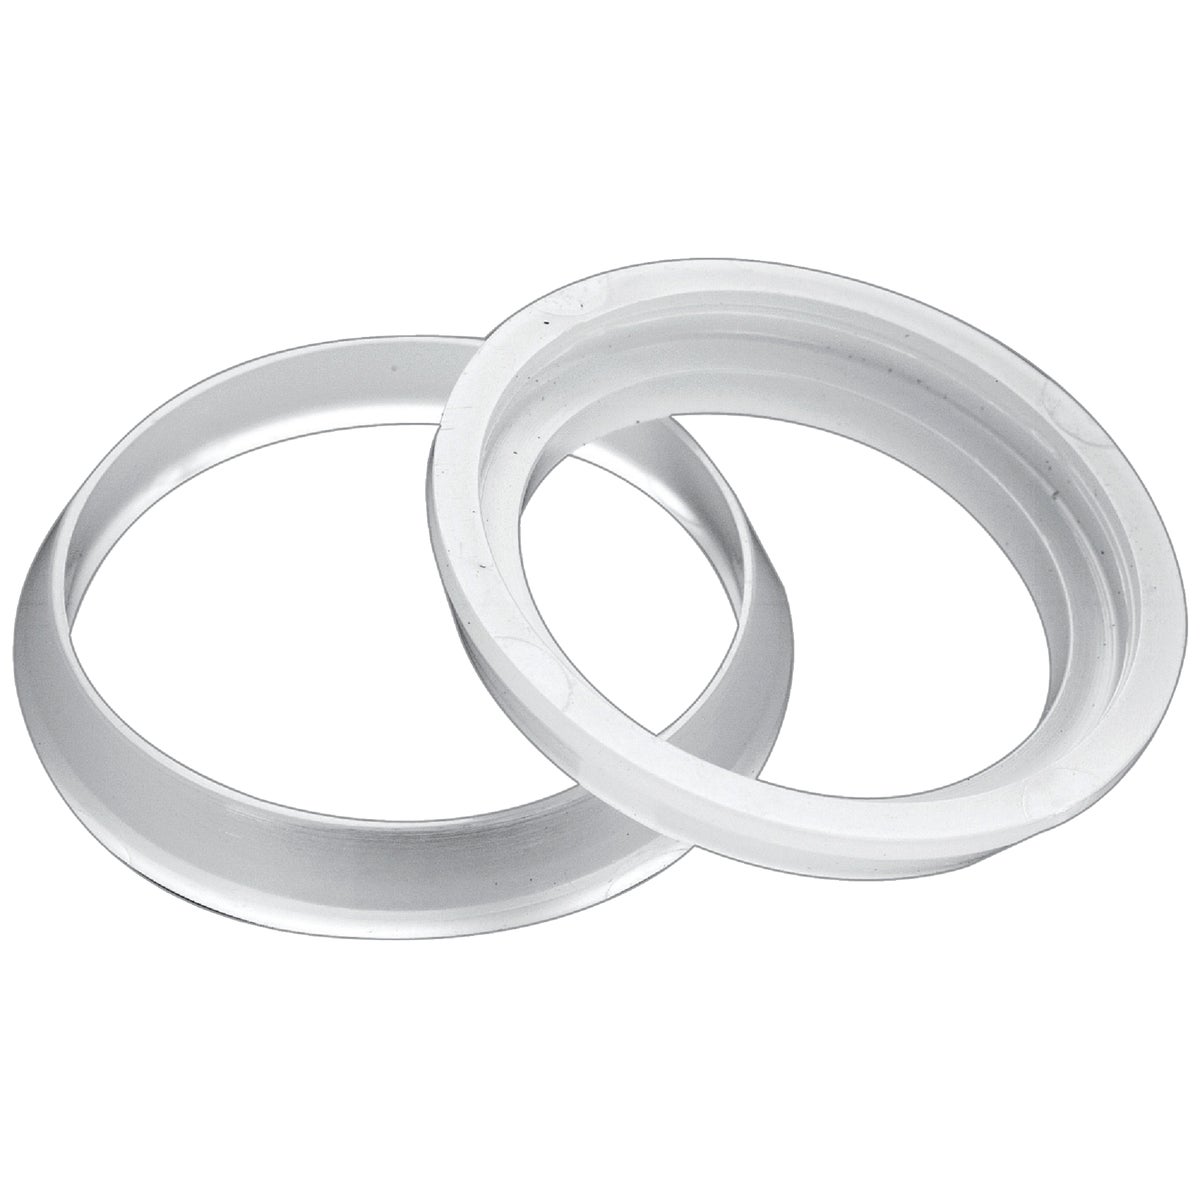 Item 443960, Poly slip-joint washers, 2 per bag.